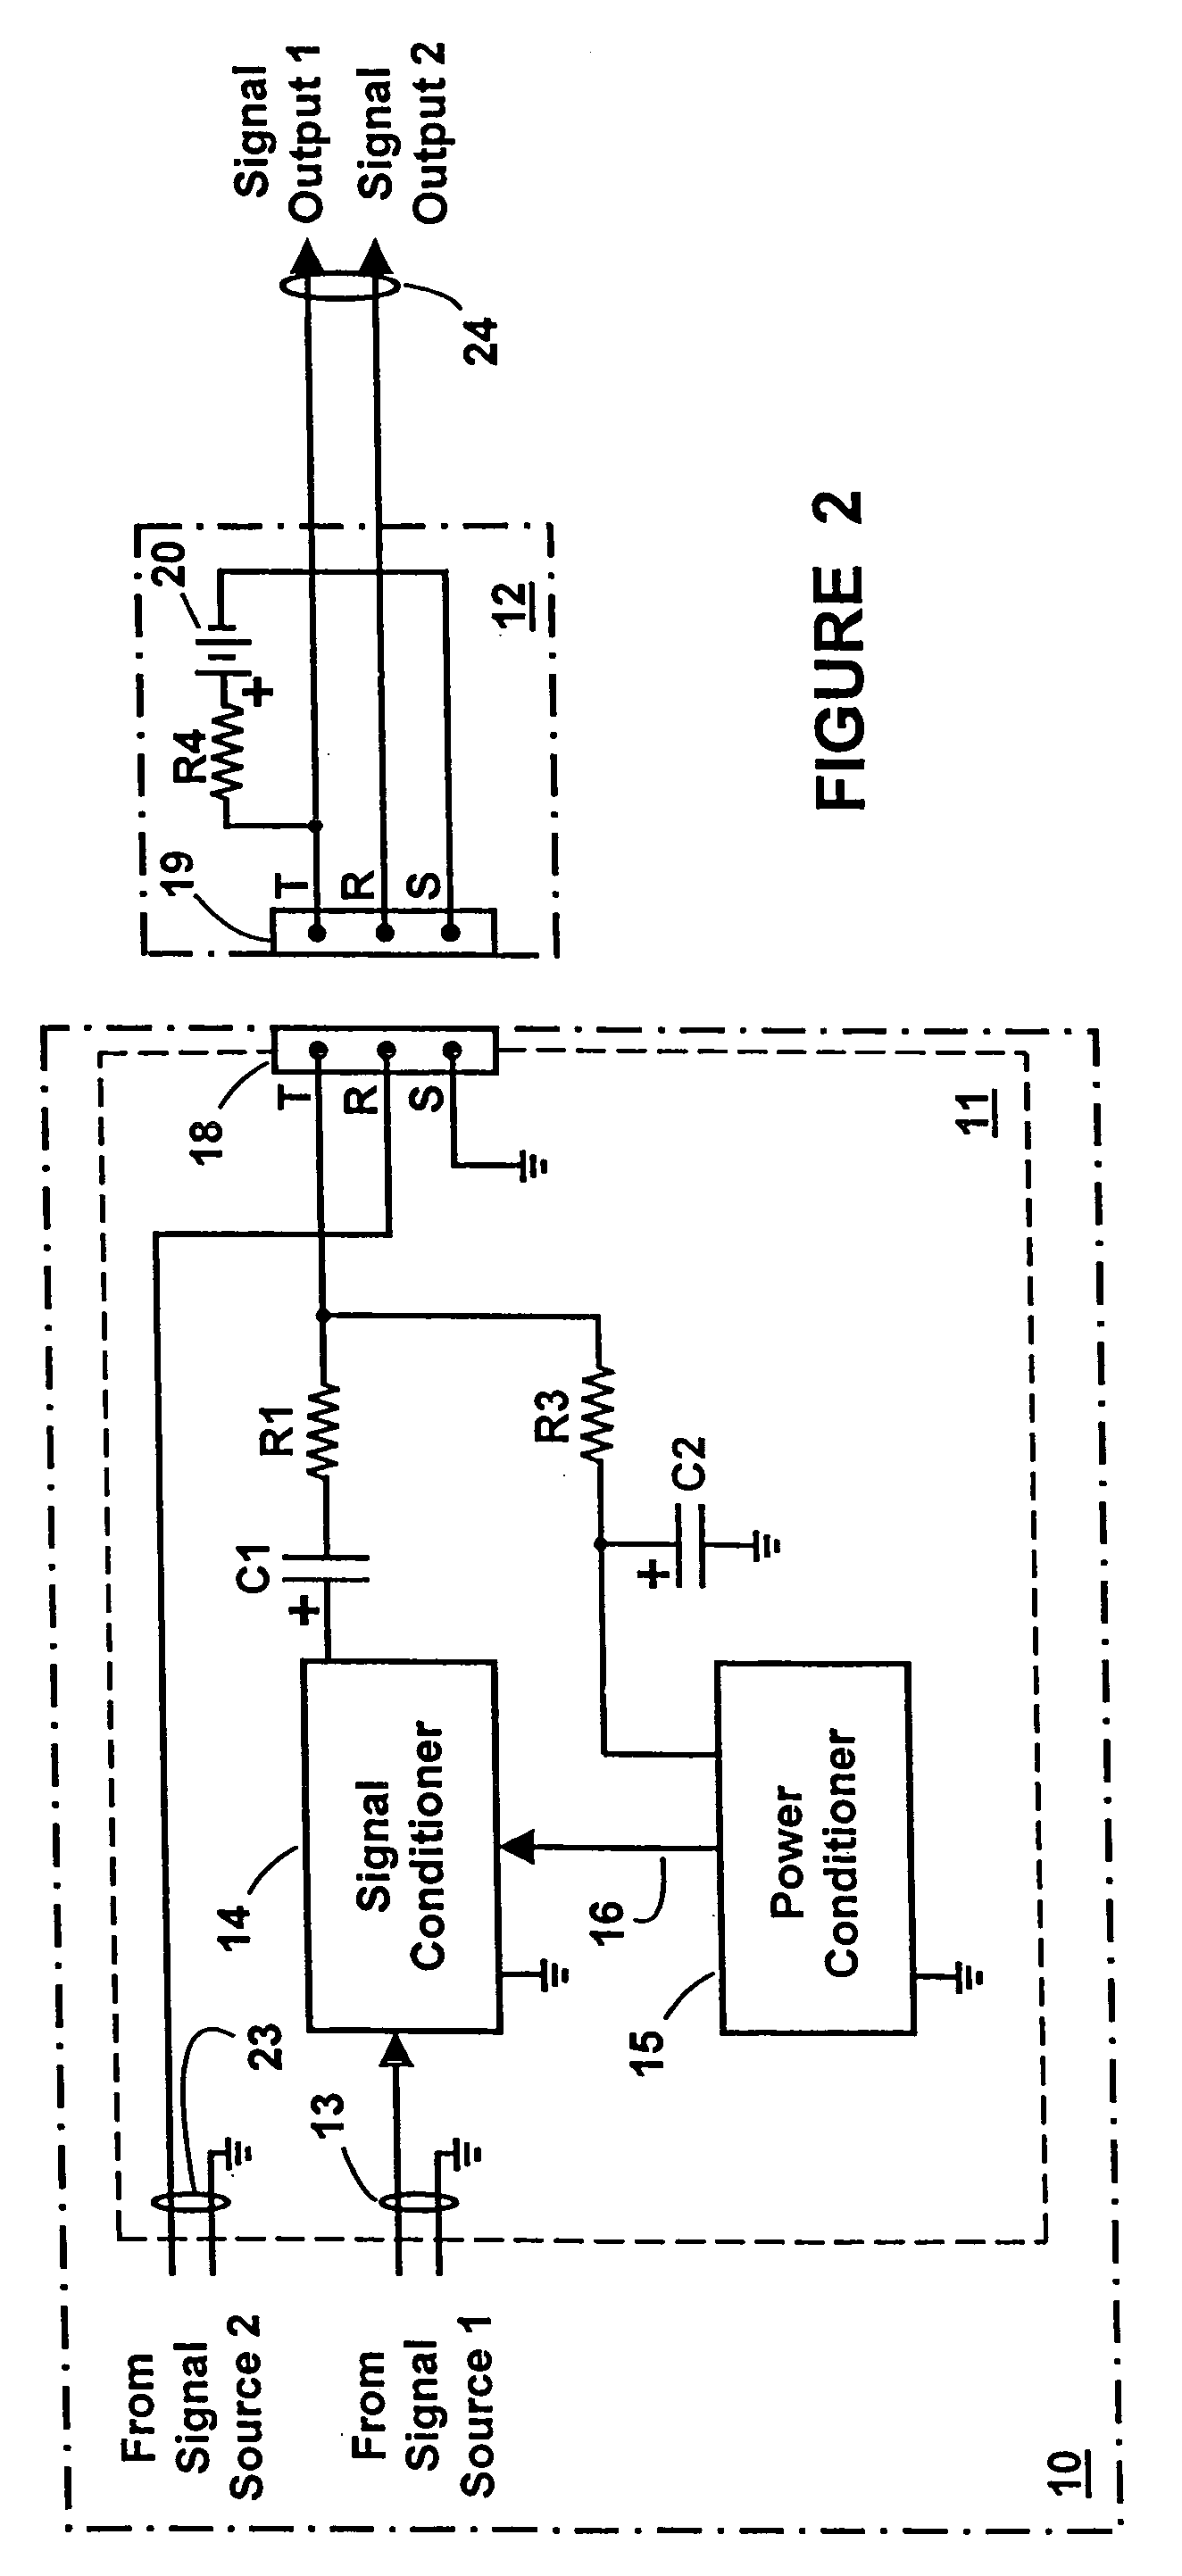 Apparatus for powering an electronic musical instrument